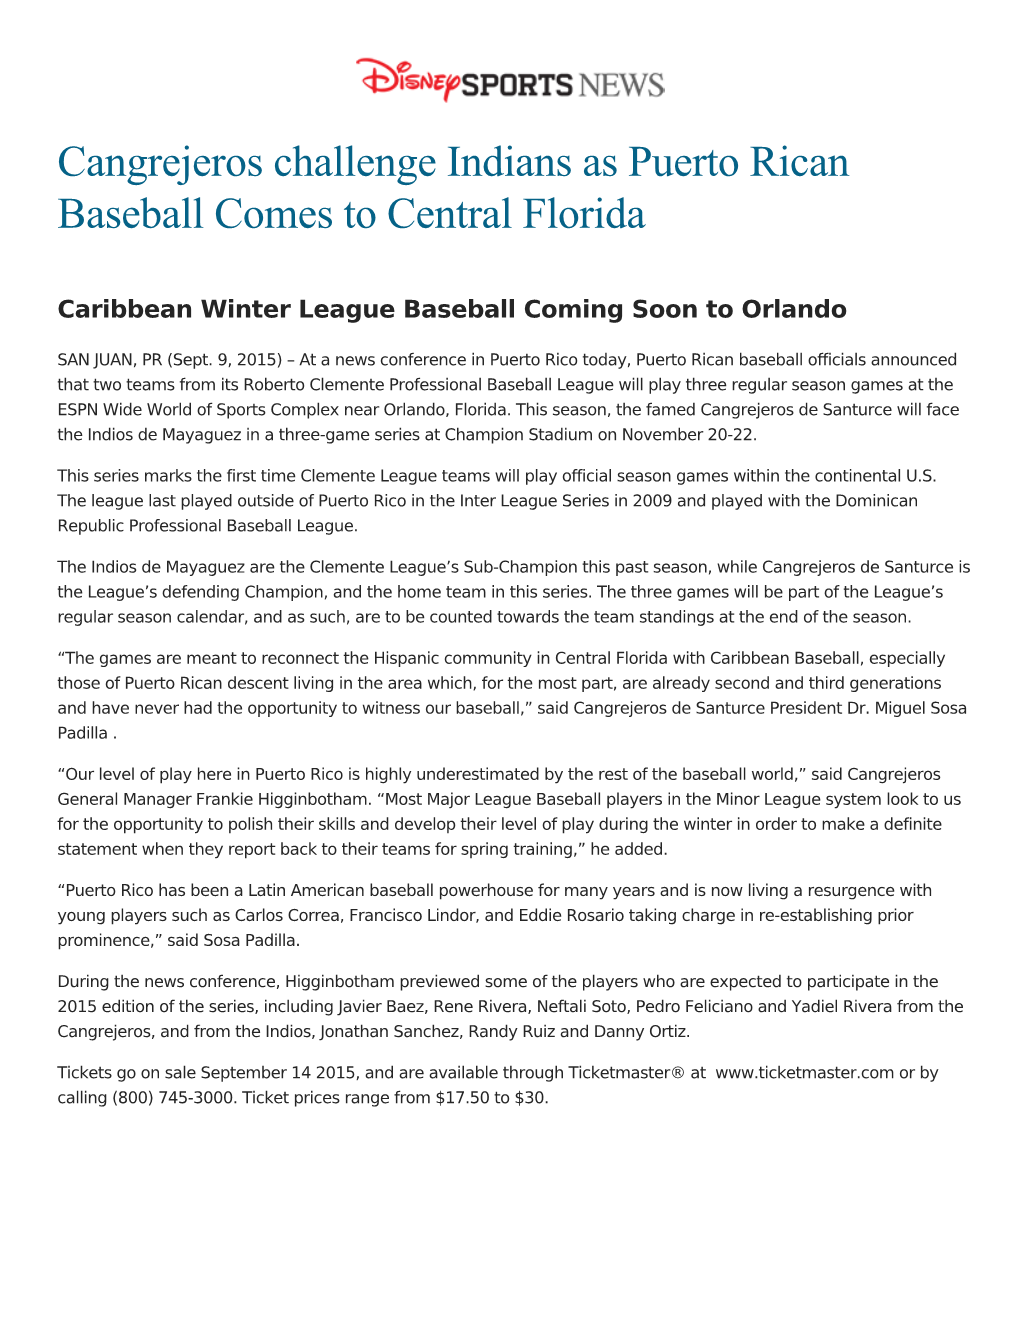 Cangrejeros Challenge Indians As Puerto Rican Baseball Comes to Central Florida